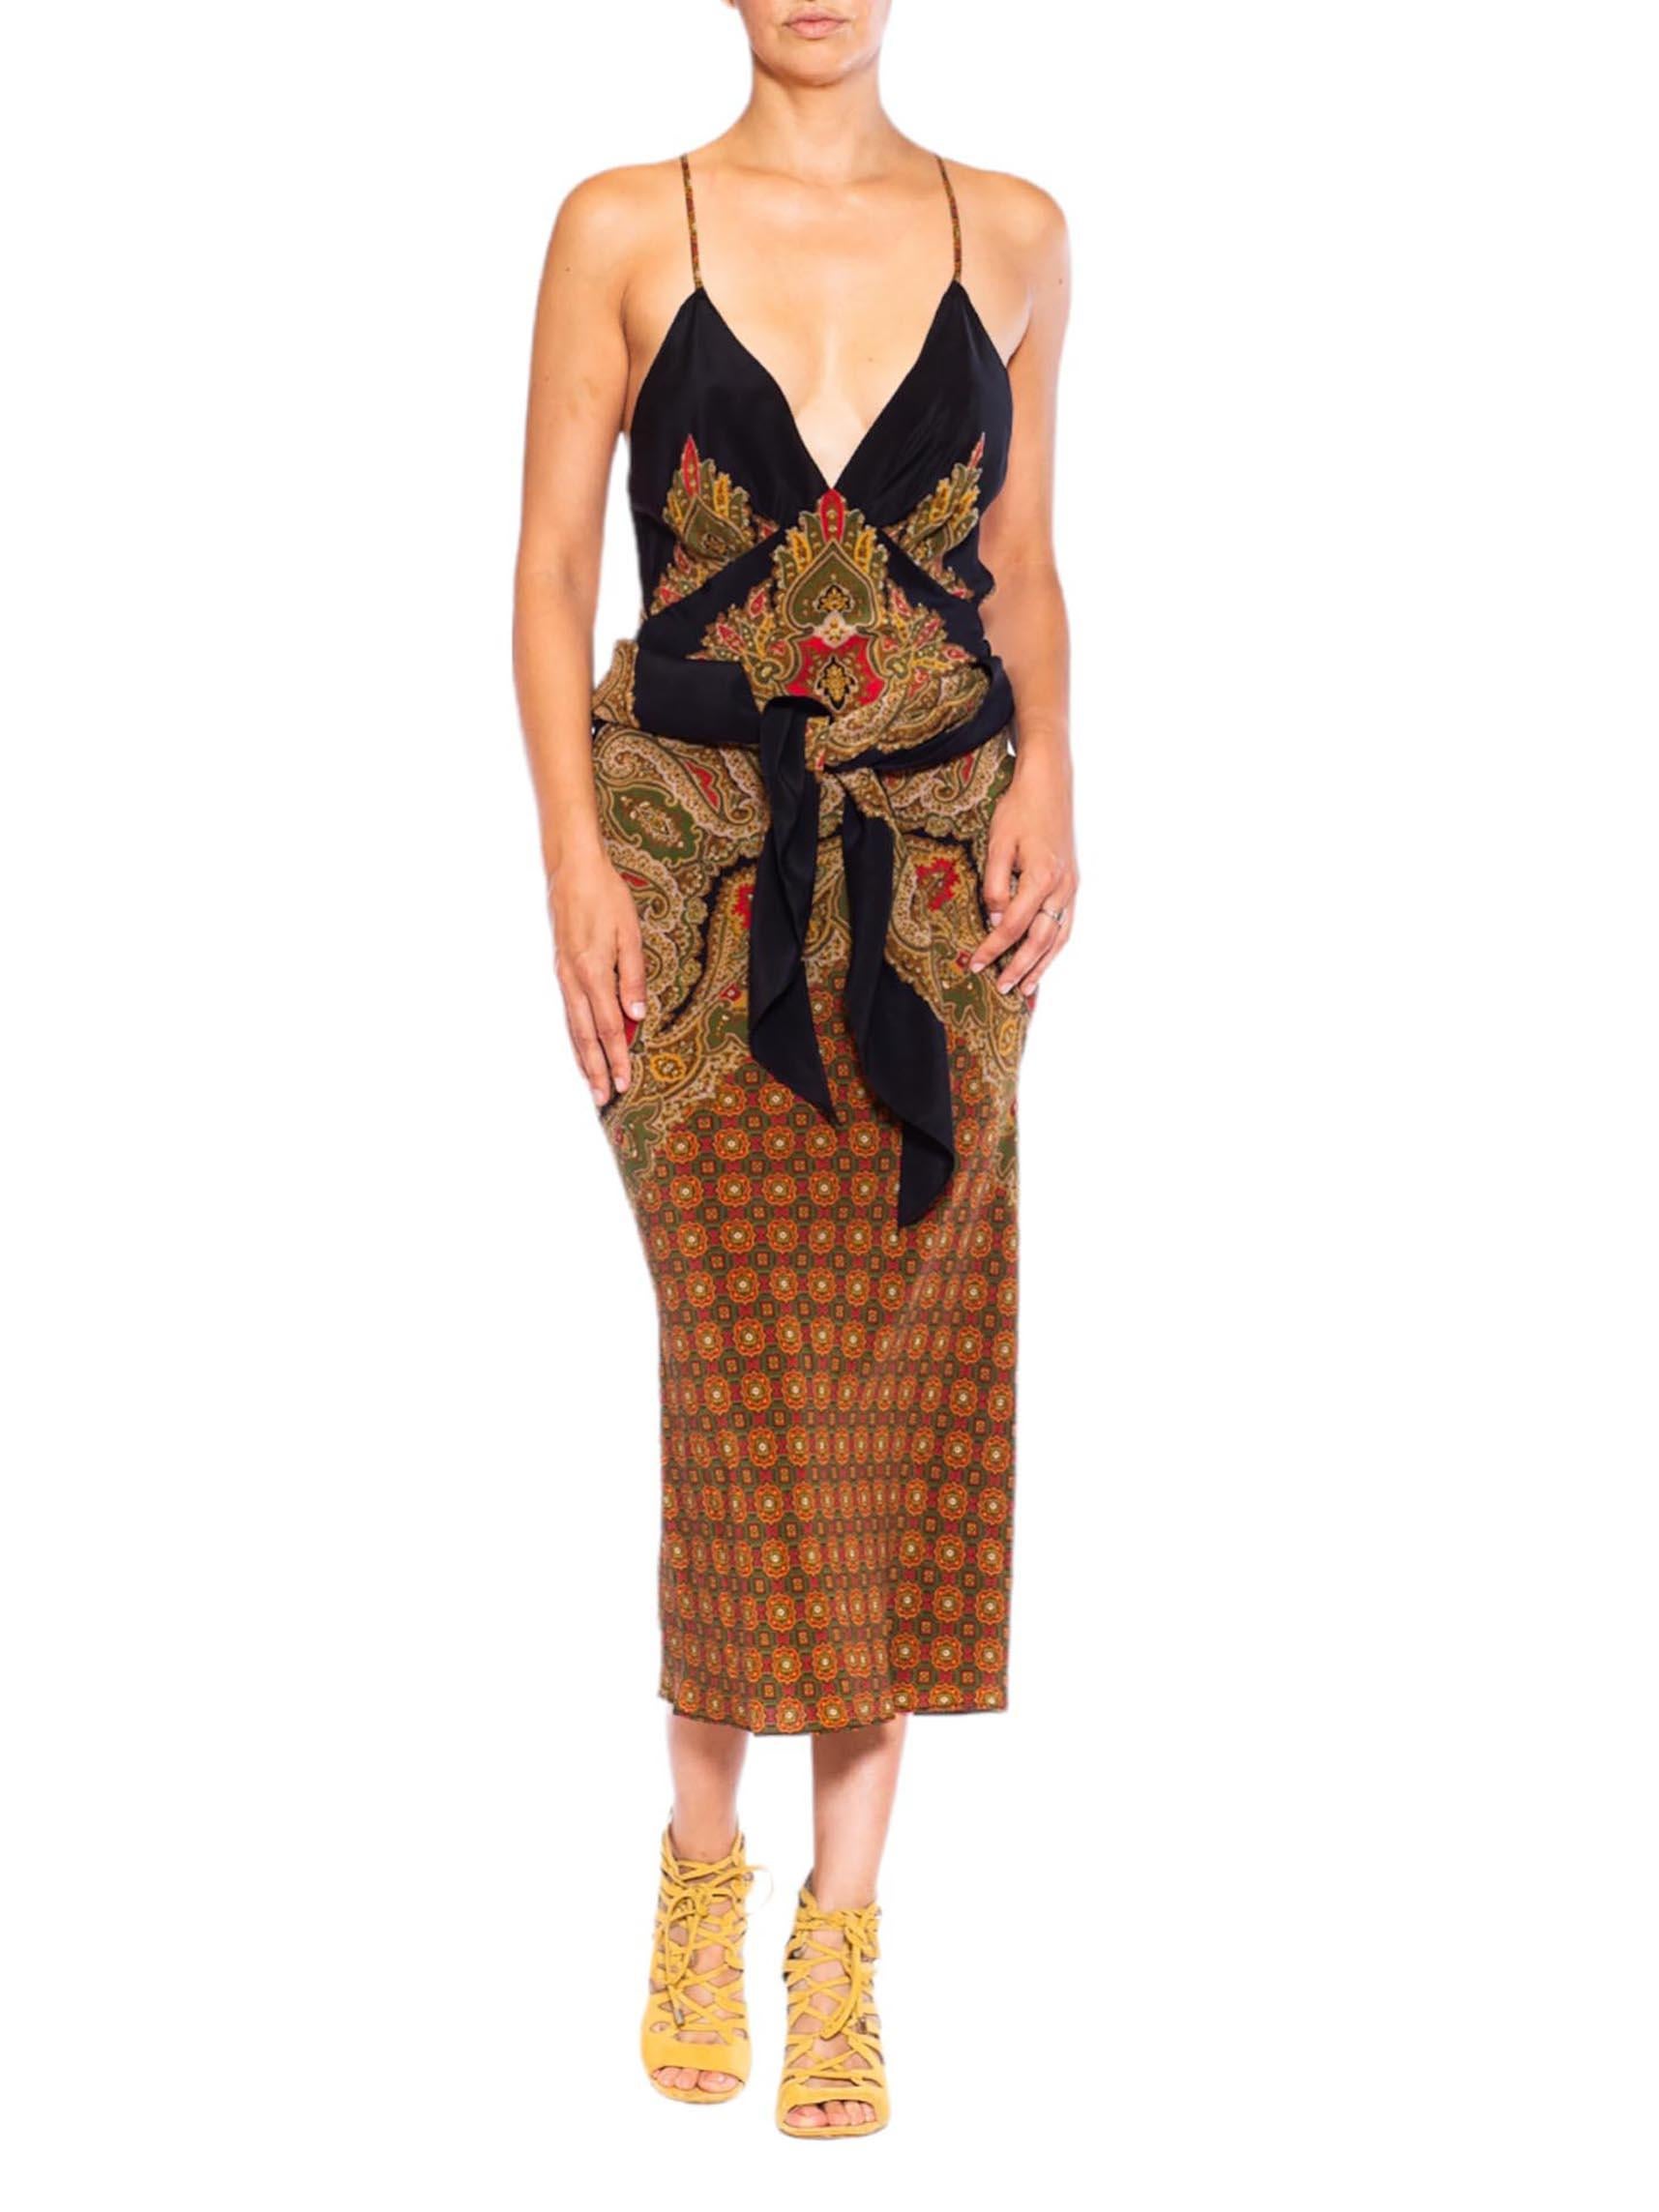 MORPHEW COLLECTION Black, Green & Red Silk Sagittarius One Scarf Dress Made Fro For Sale 6